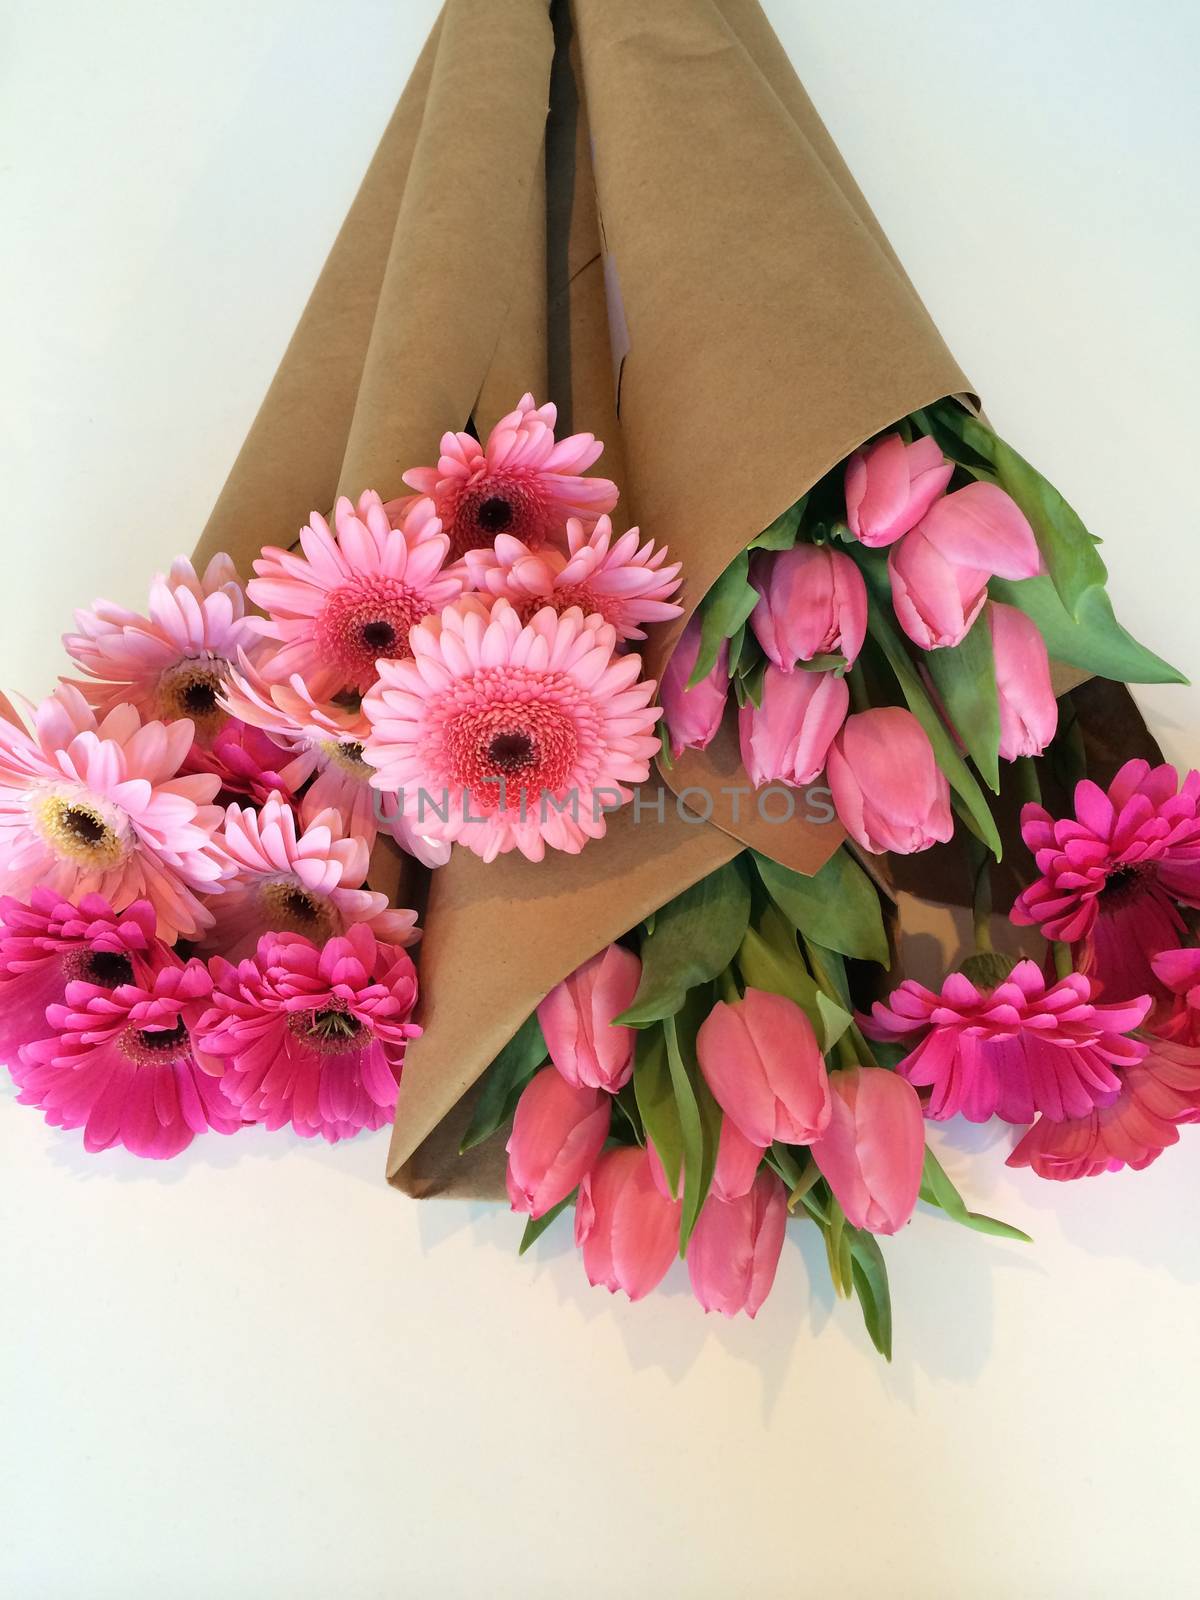 Variety of pink flowers wrapped in brown paper